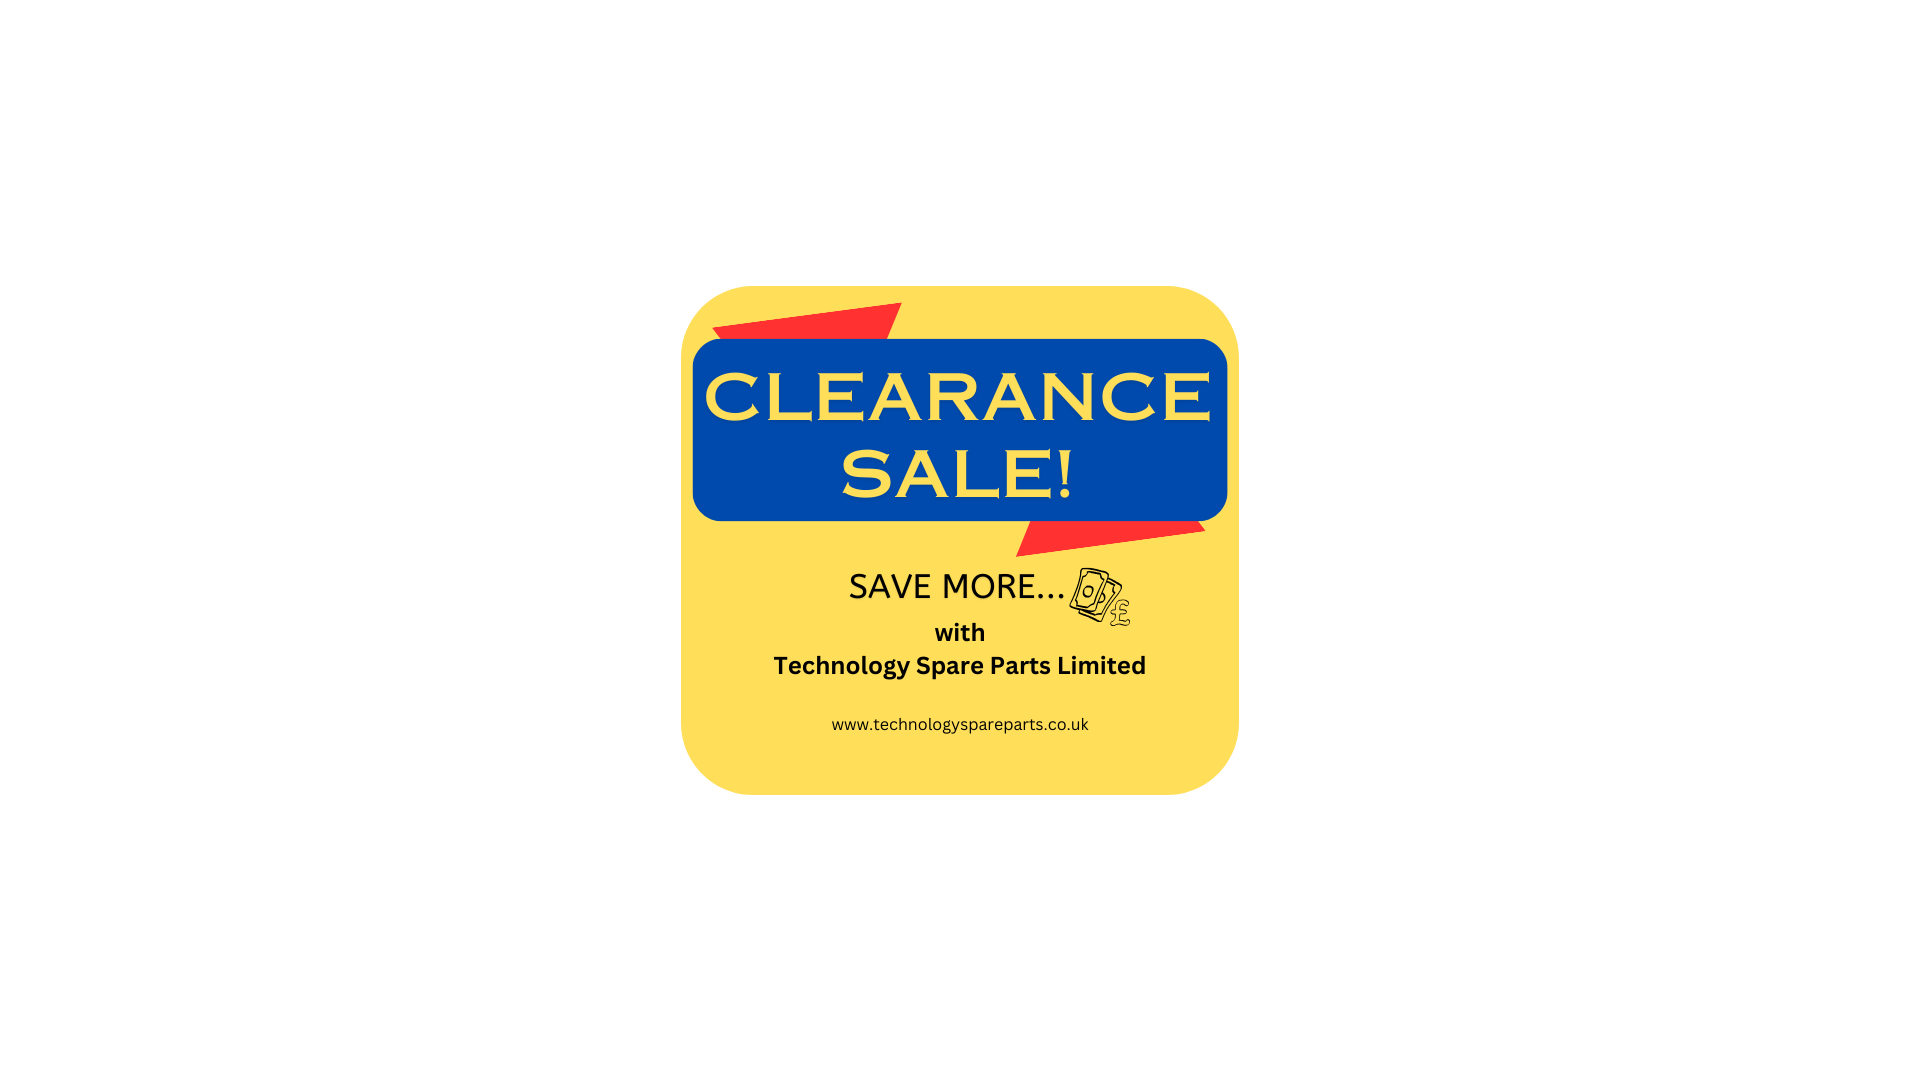 Clearance Sale - Technology Spare Parts